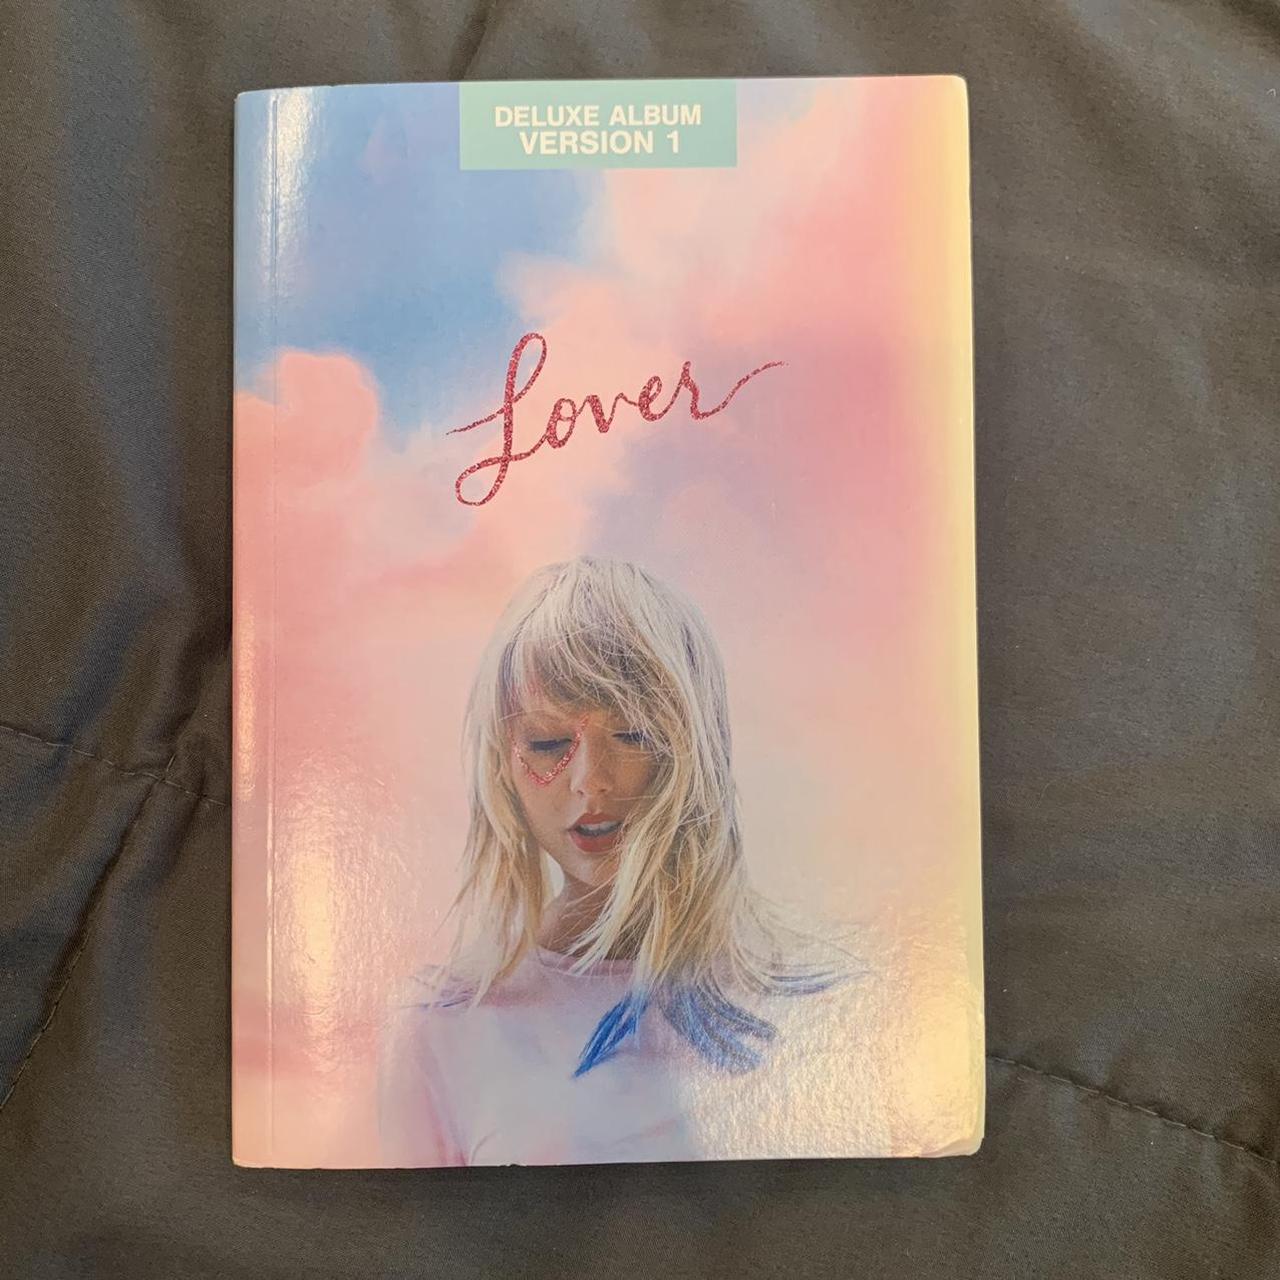 Taylor Swift Lover diary version 1 (CD and poster... - Depop